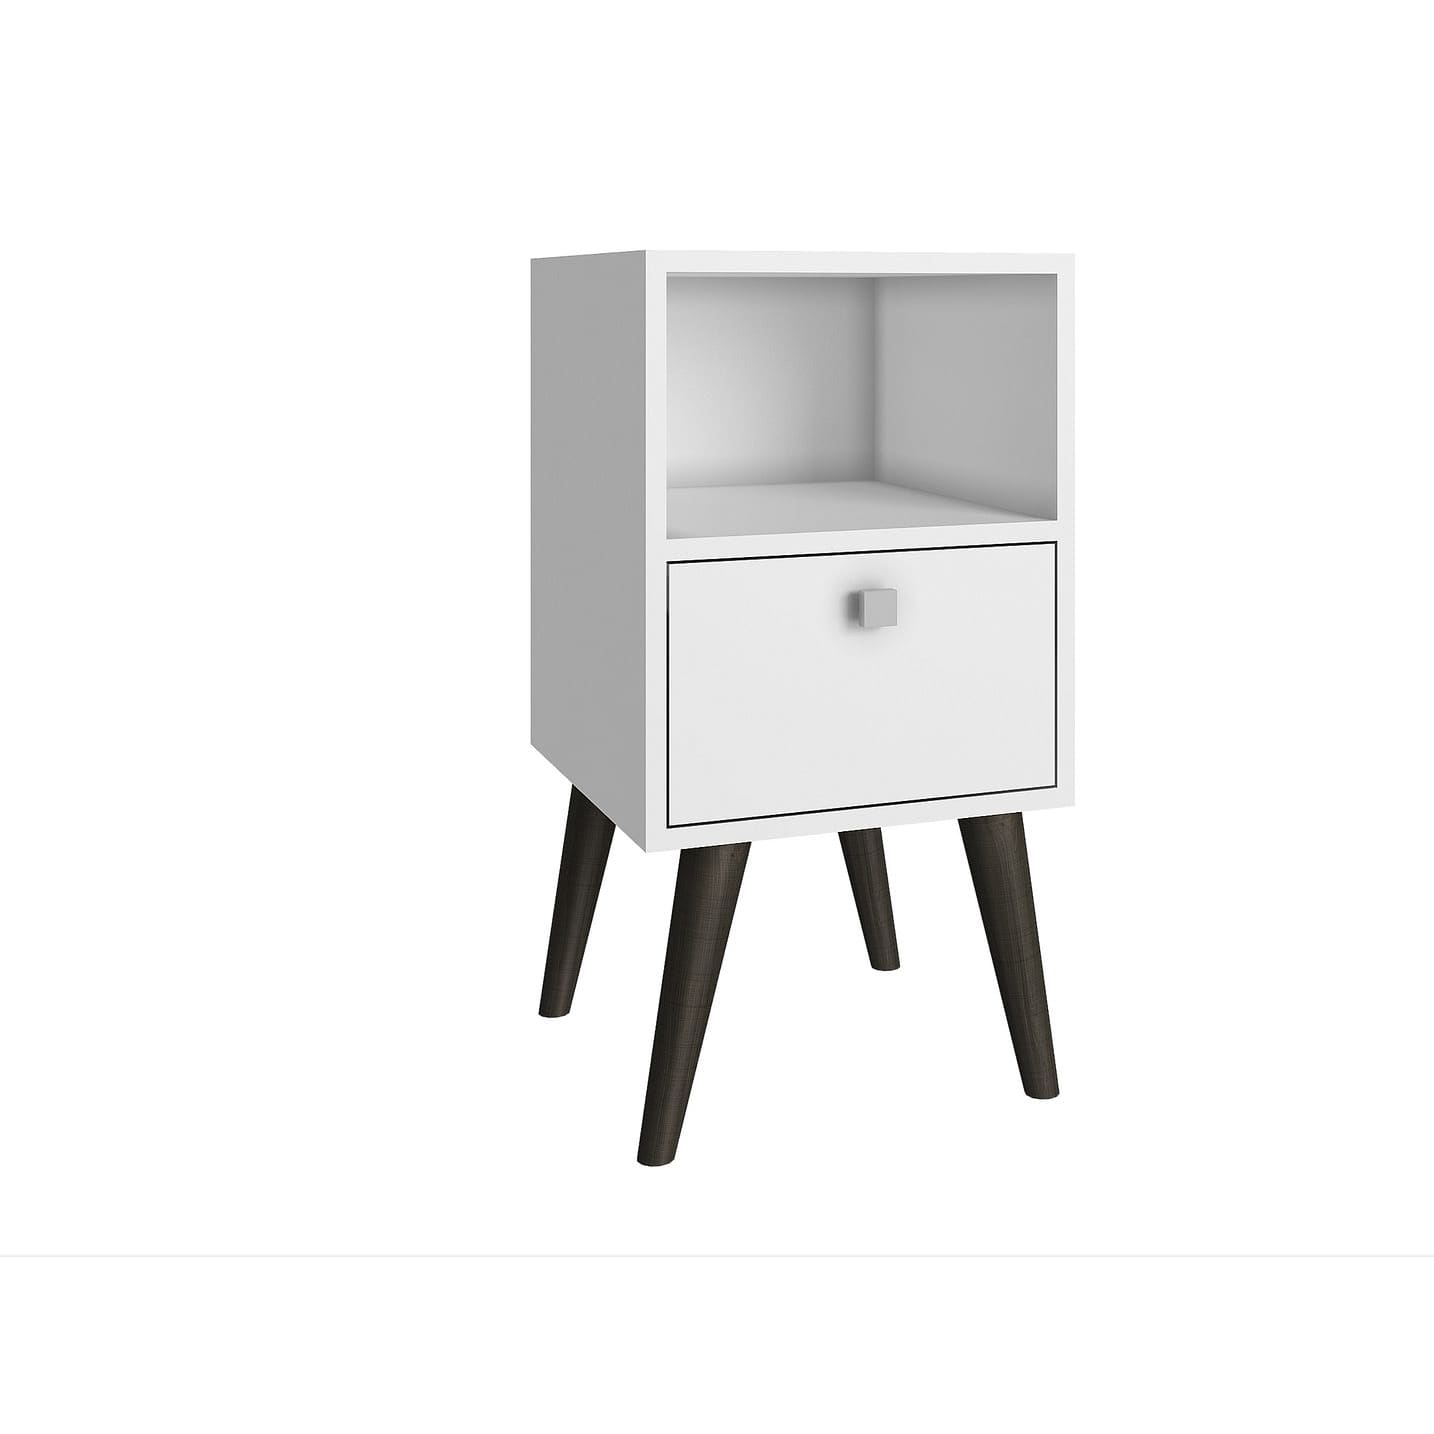 Manhattan Comfort Abisko Stylish Side Table with 1-Cubby and